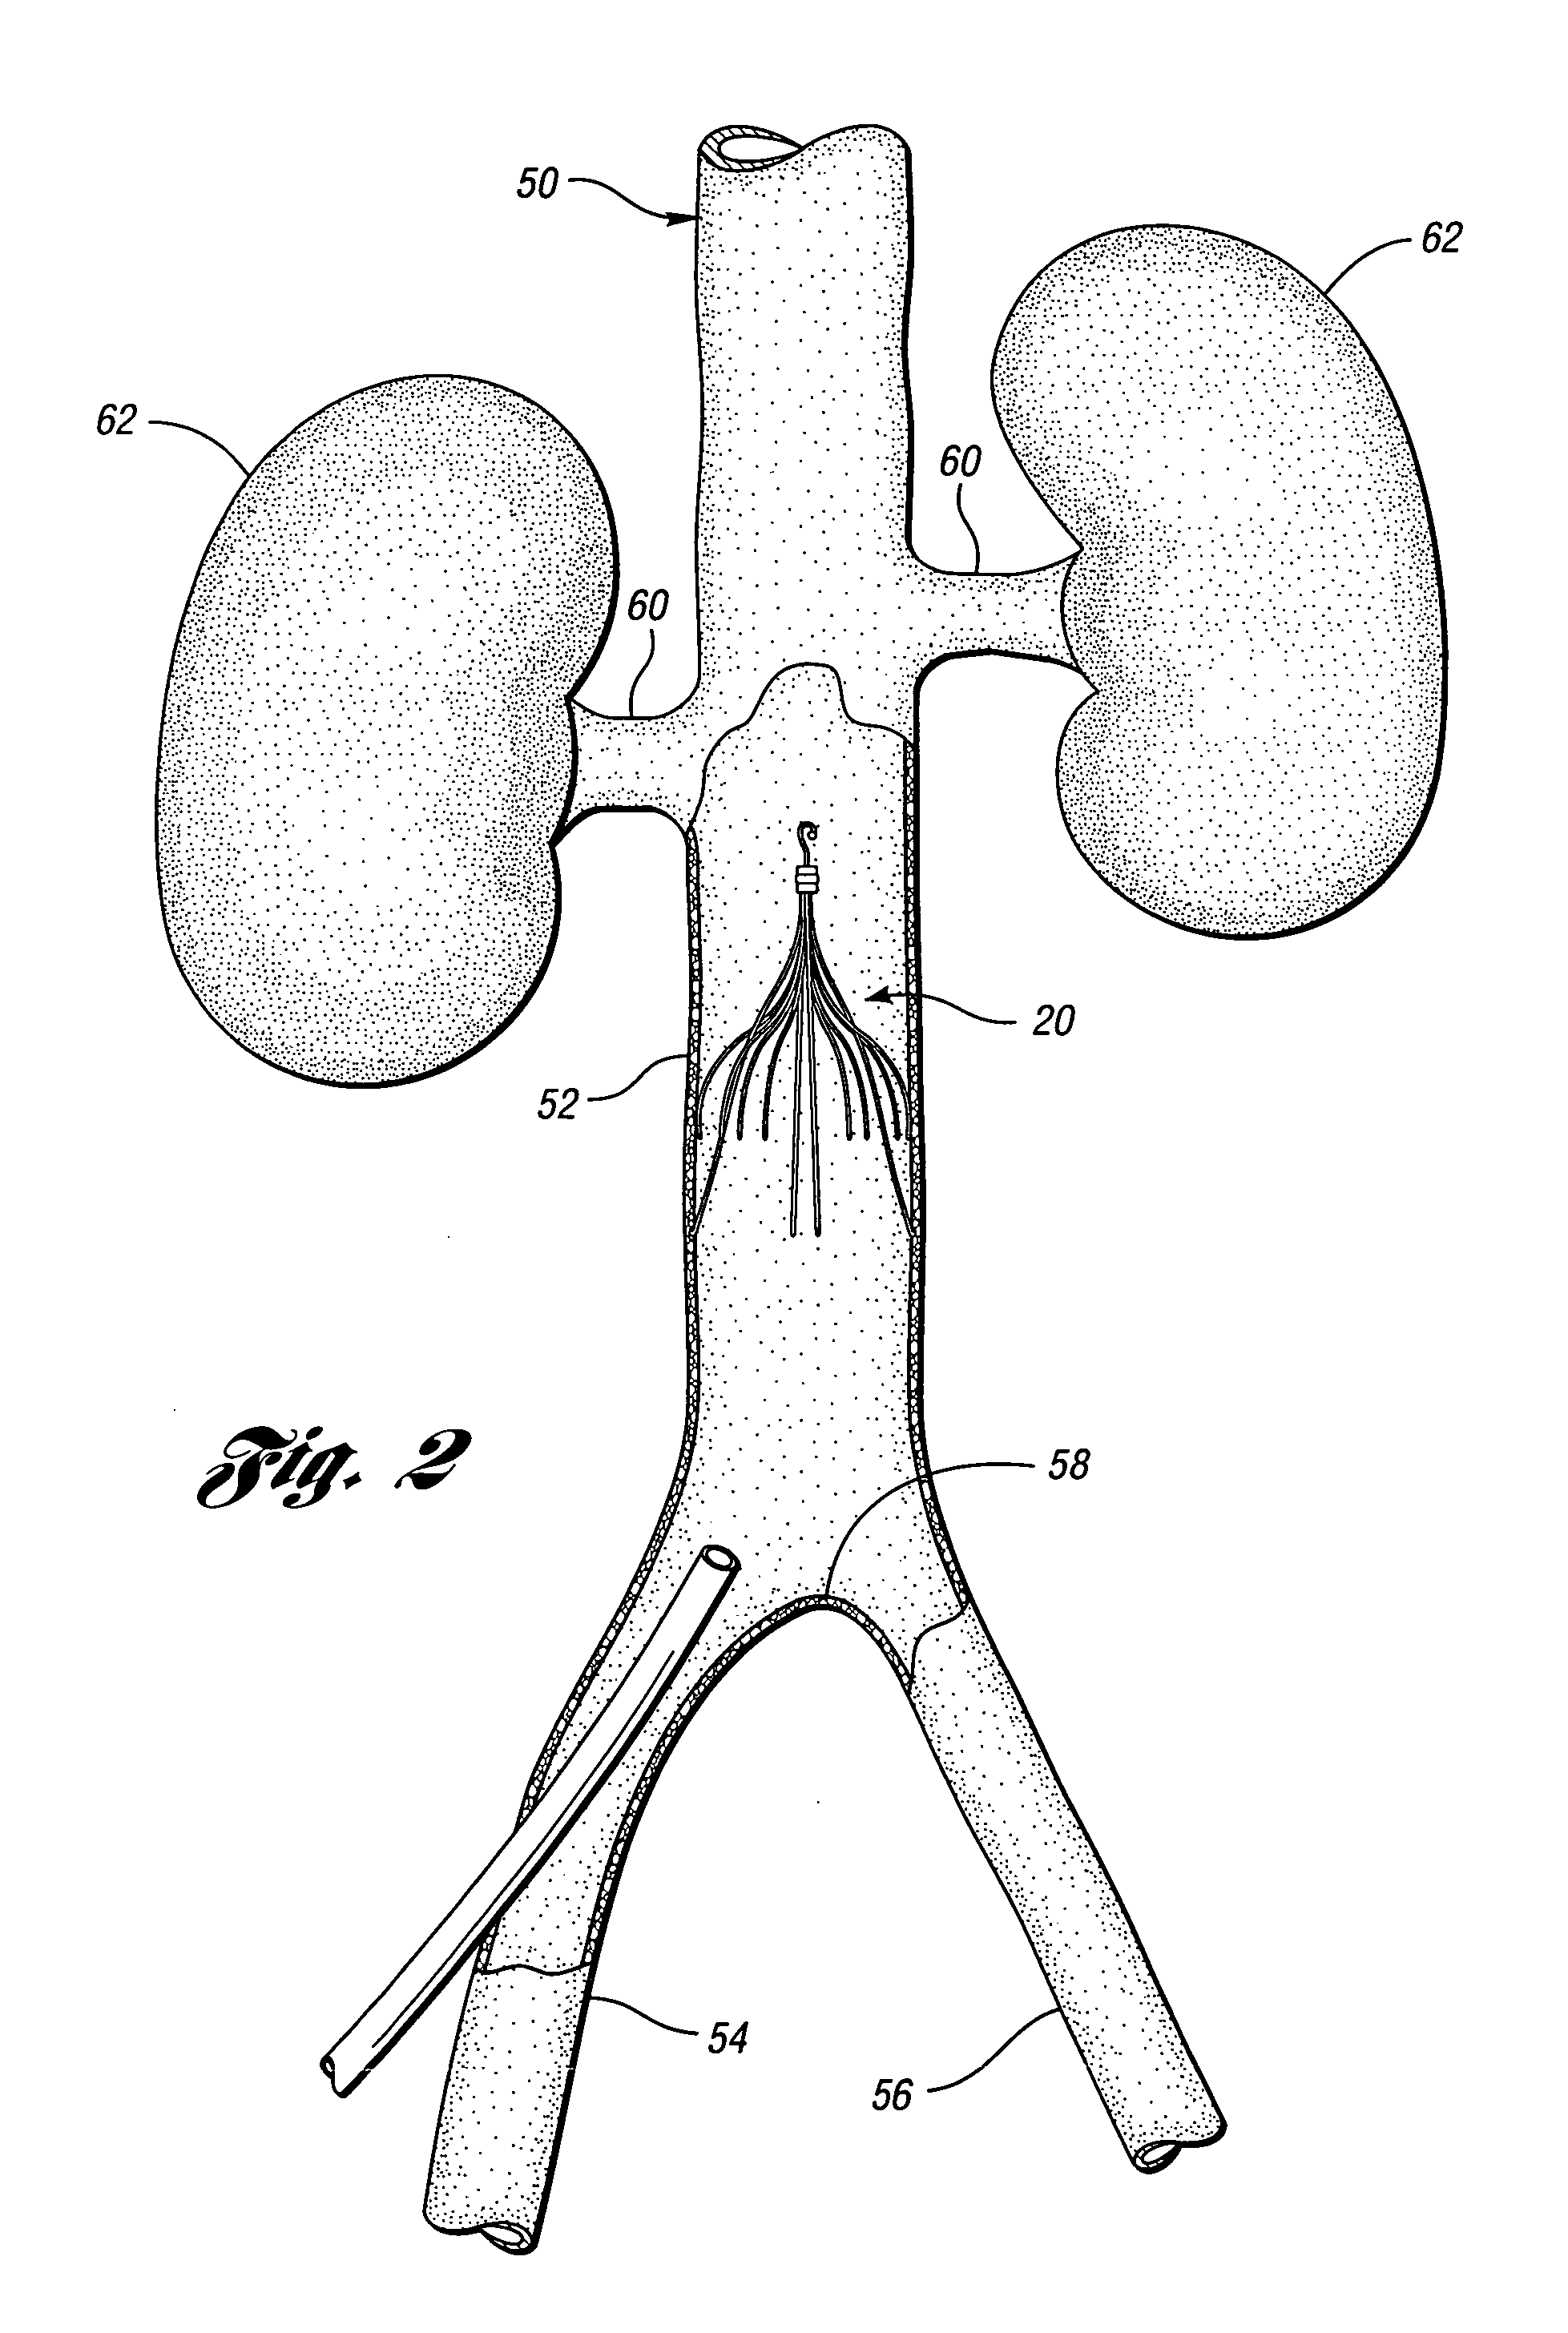 Removable vena cava filter having inwardly positioned anchoring hooks in collapsed configuration